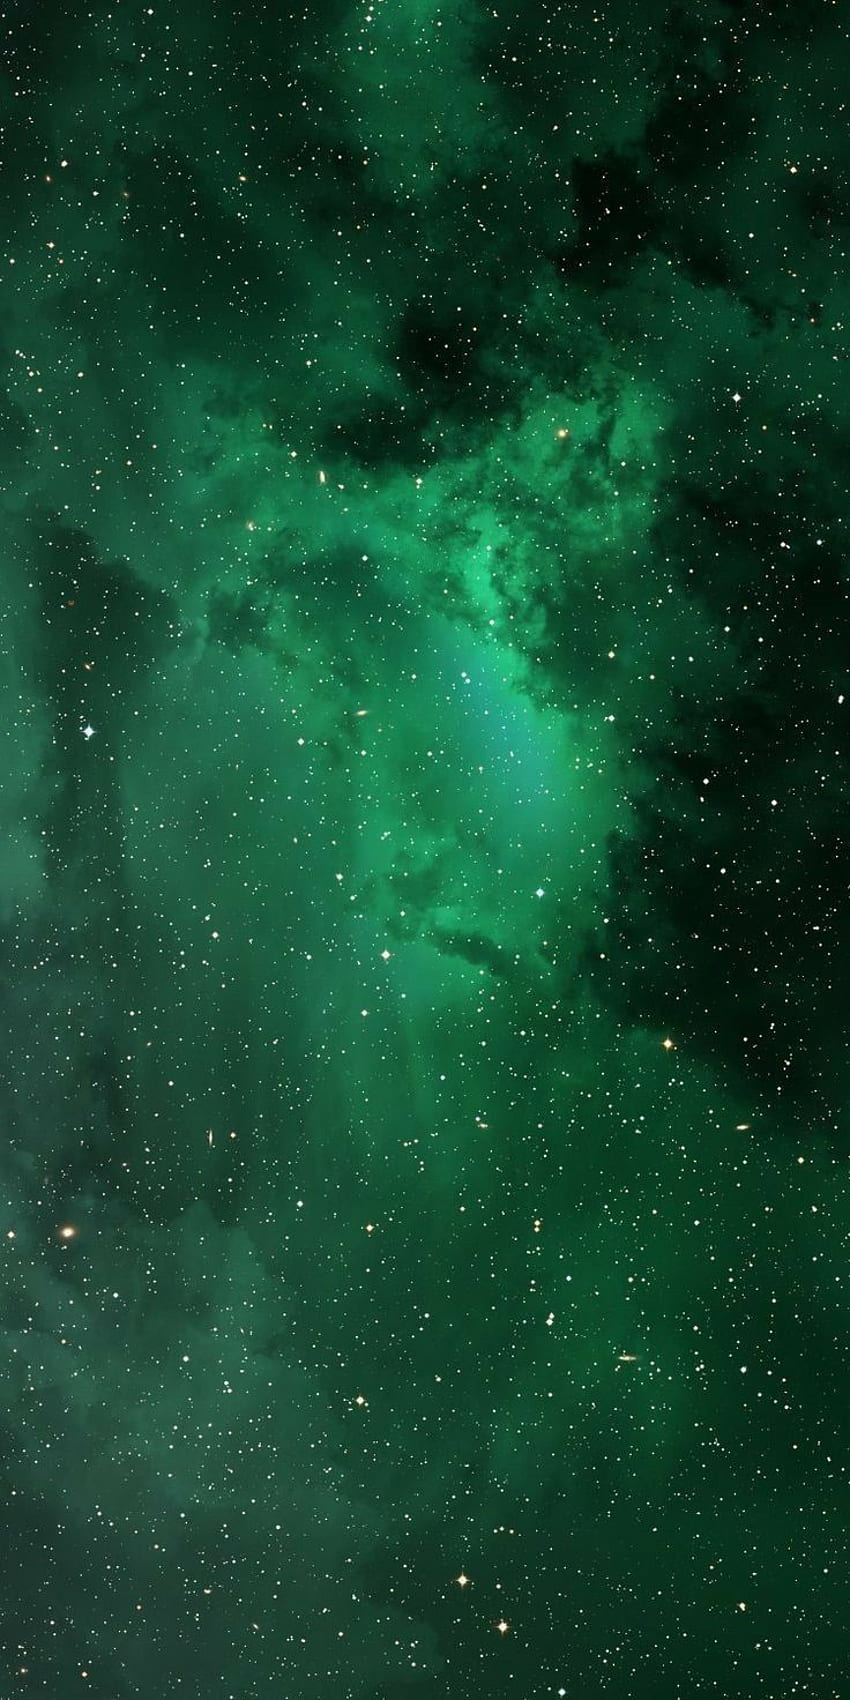 A green nebula with stars and clouds - Dark green